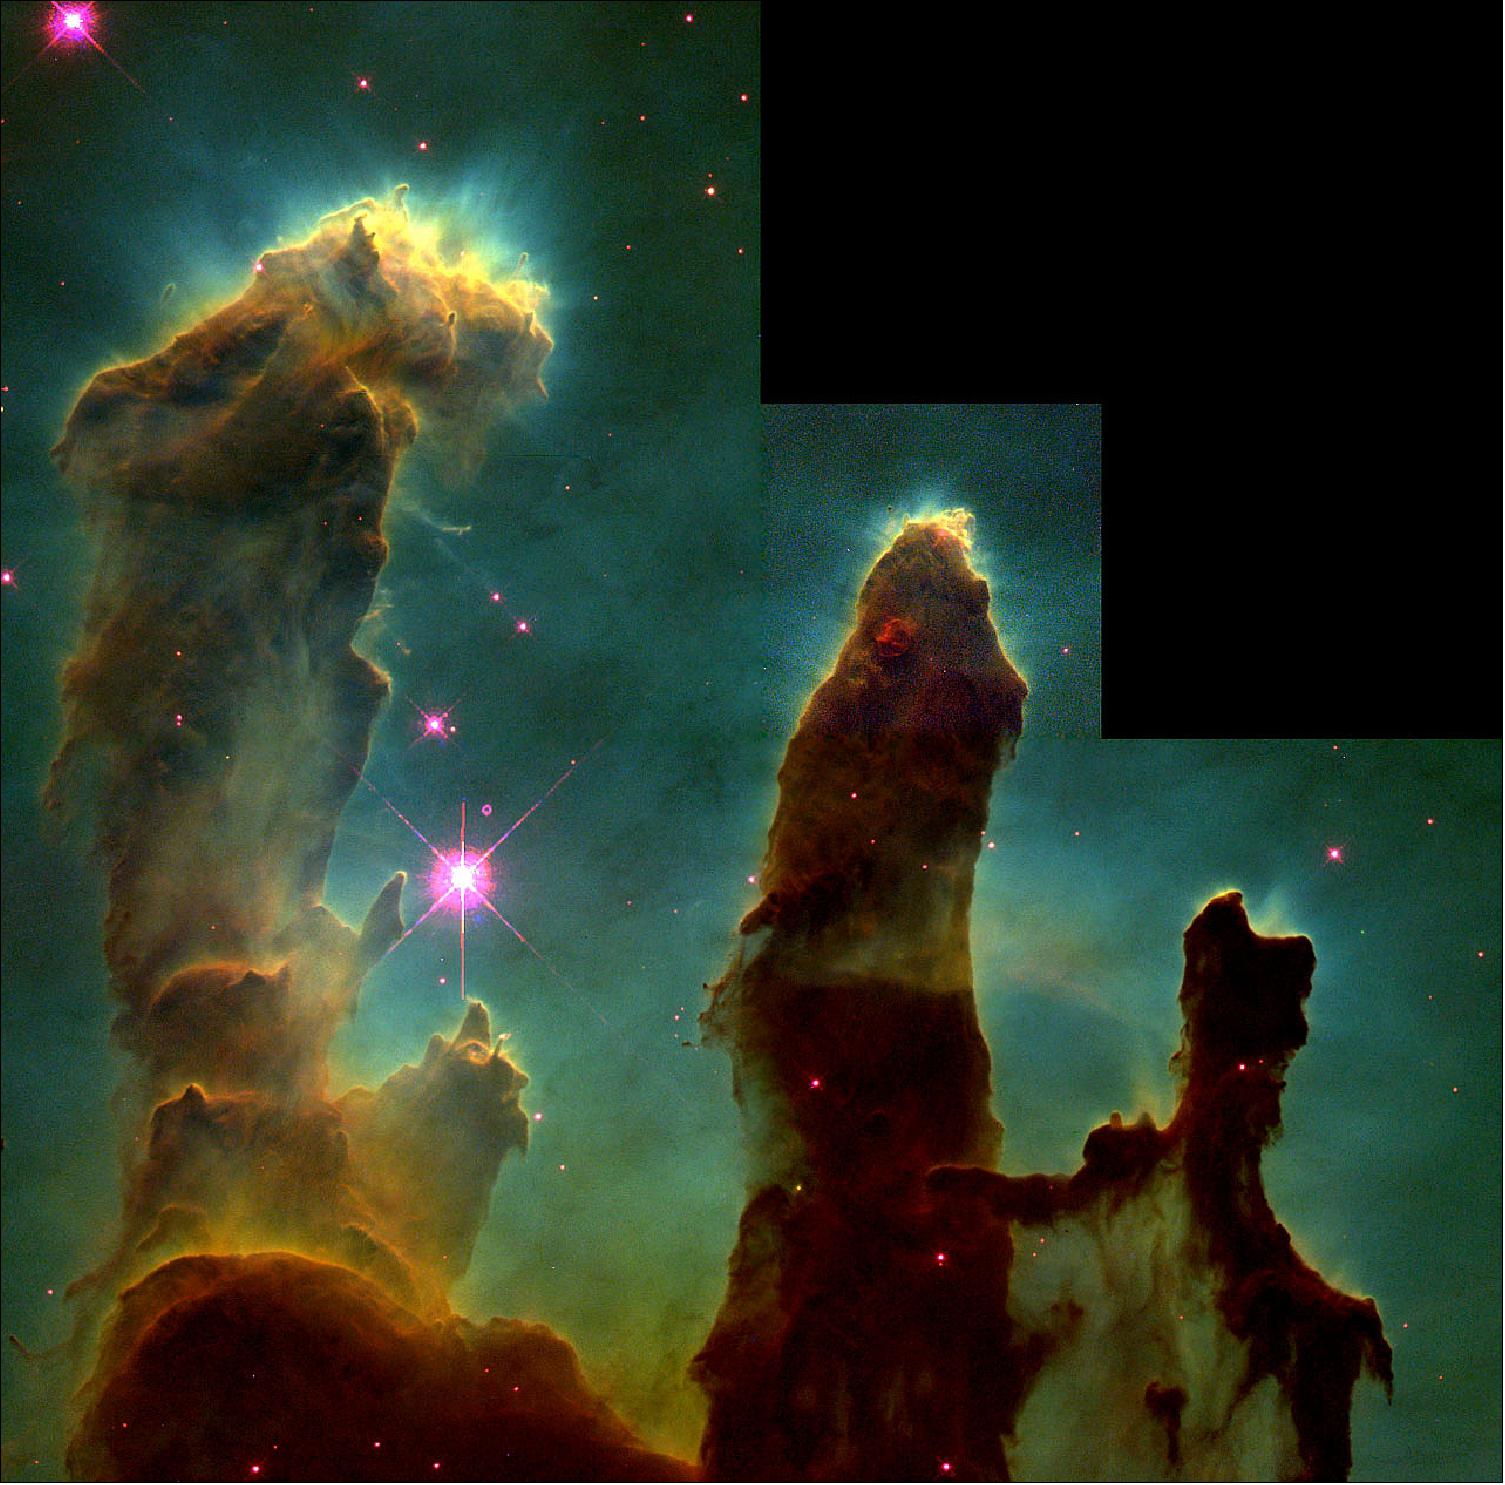 Figure 50: Gas Pillars in the Eagle Nebula (M16): Pillars of Creation in a star-forming region (image credit: NASA, ESA, STScI, J. Hester and P. Scowen (Arizona State University))